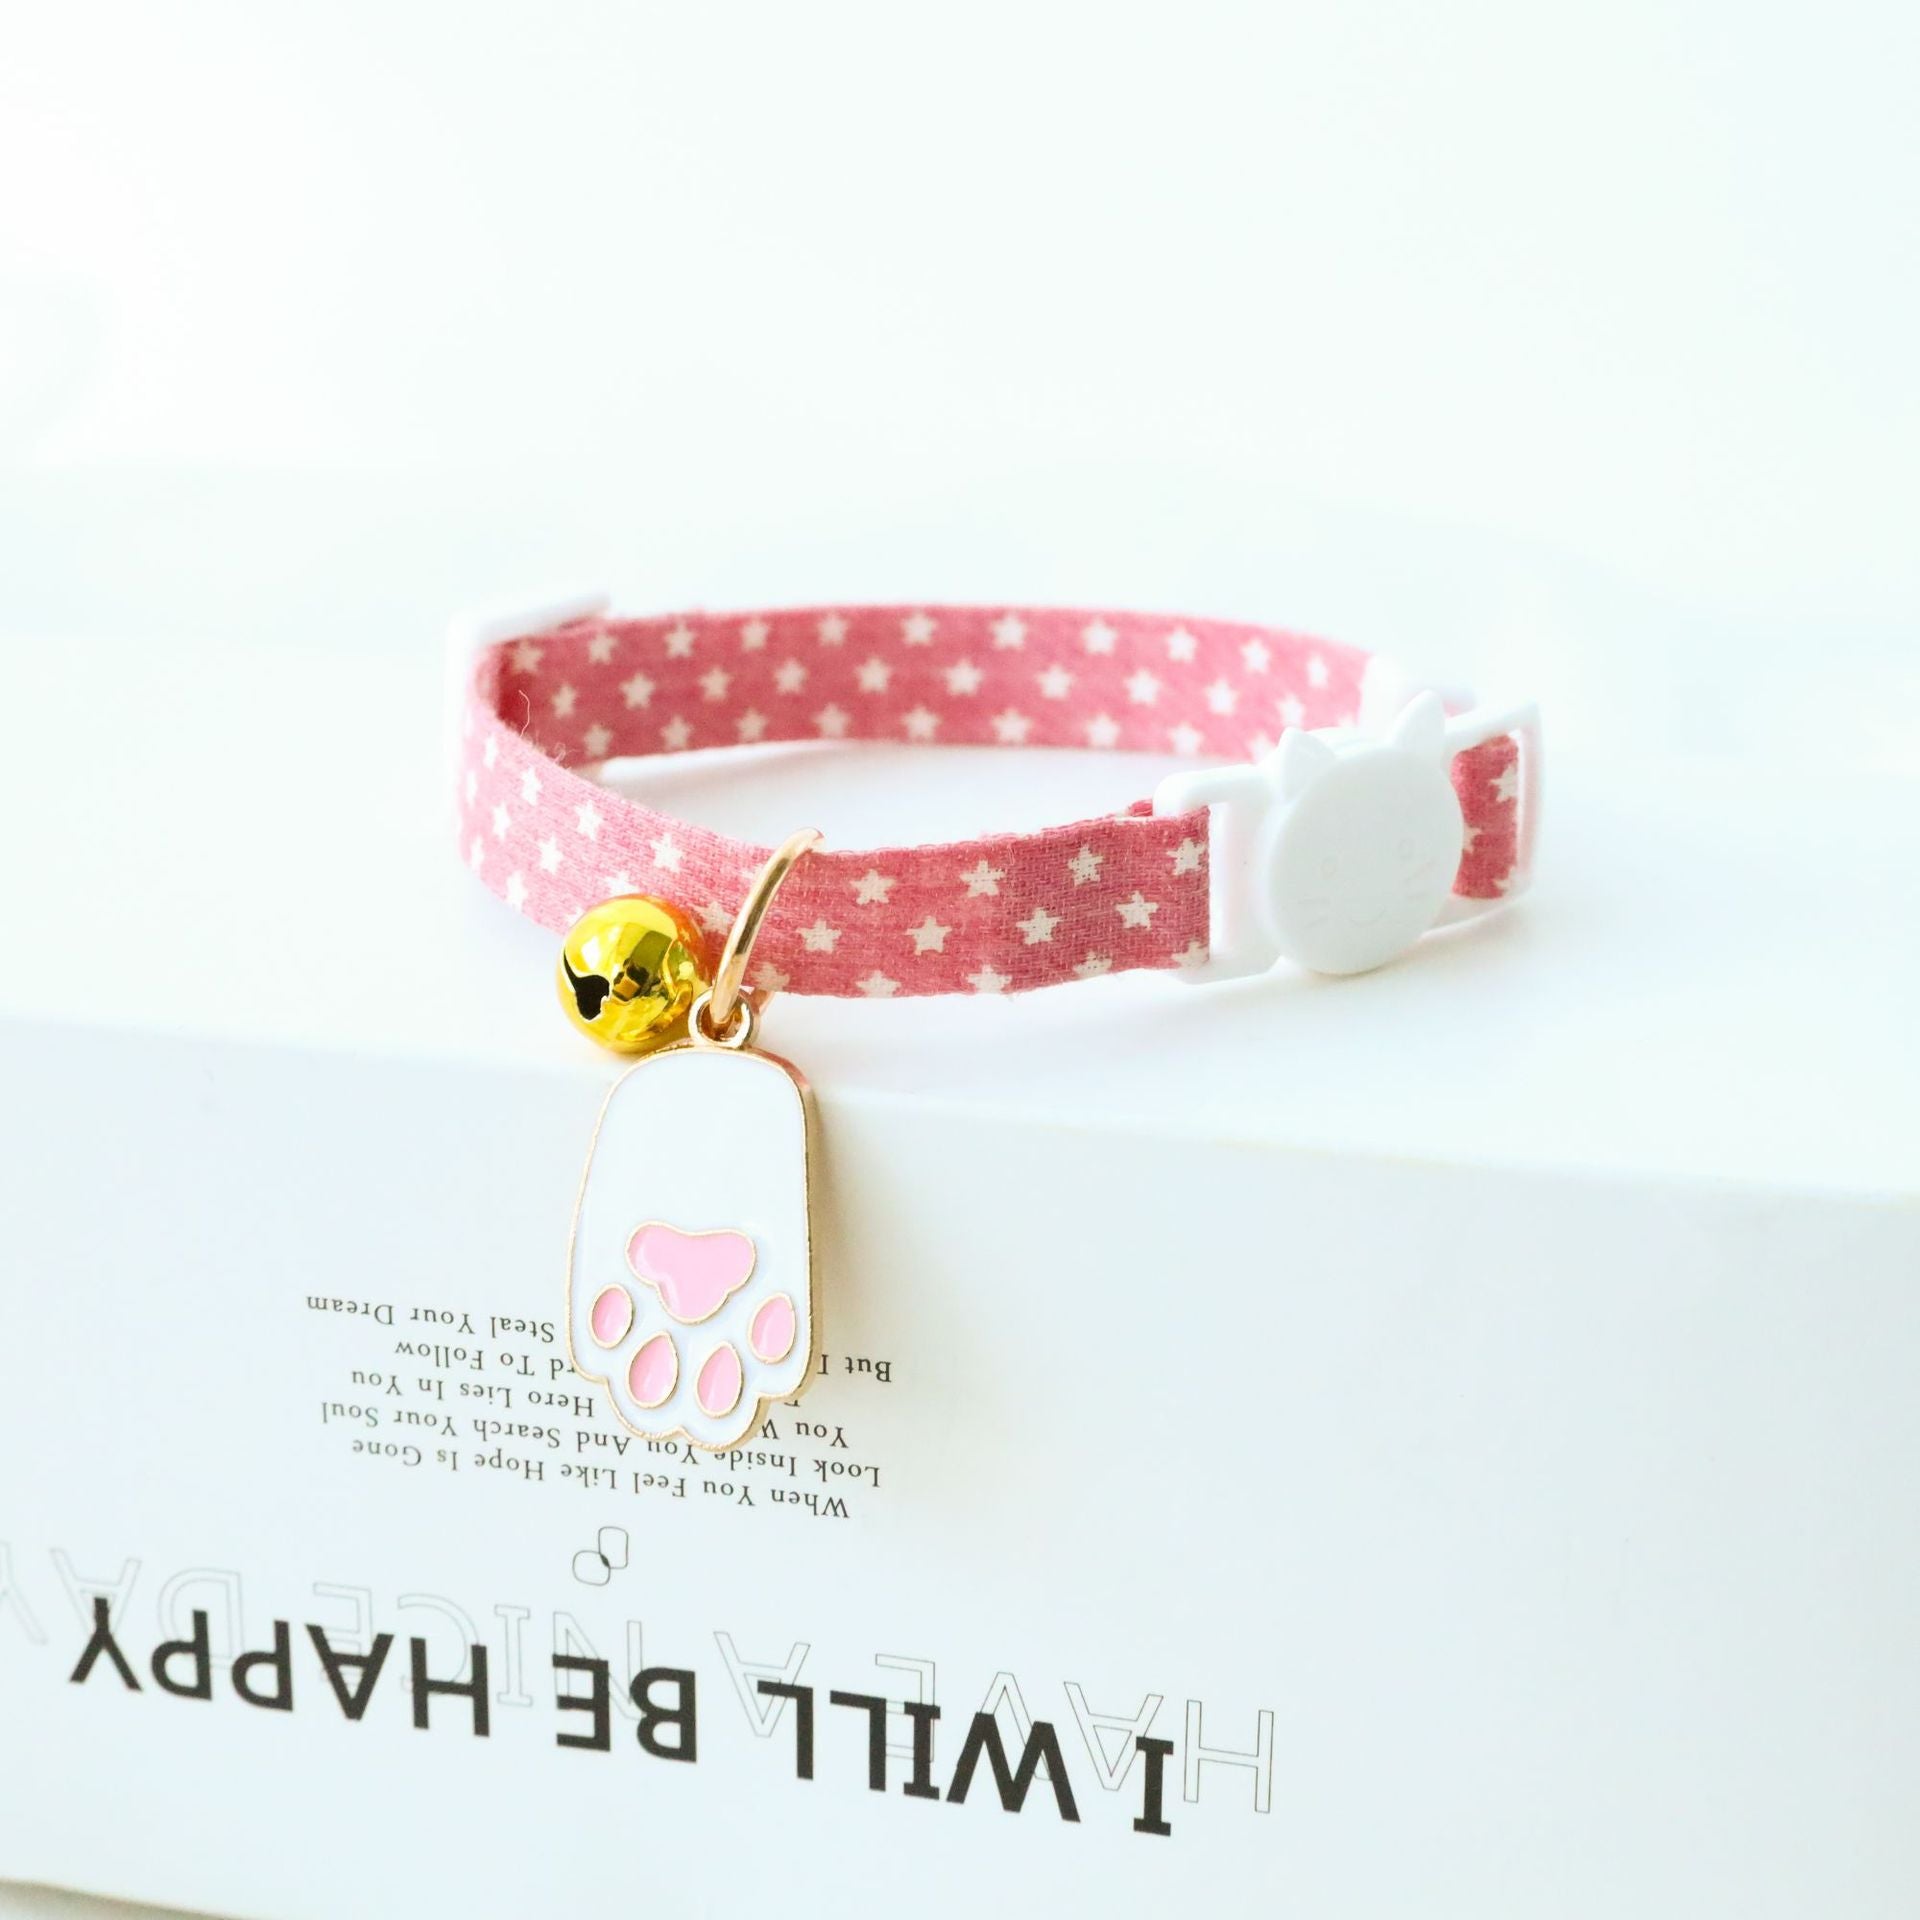 CROWNED BEAUTY Small Adjustable Dog Cat Collar for Girl with Detachable Bow  Tie,Pink Love Hearts Design (Sweetheart) CC07-S